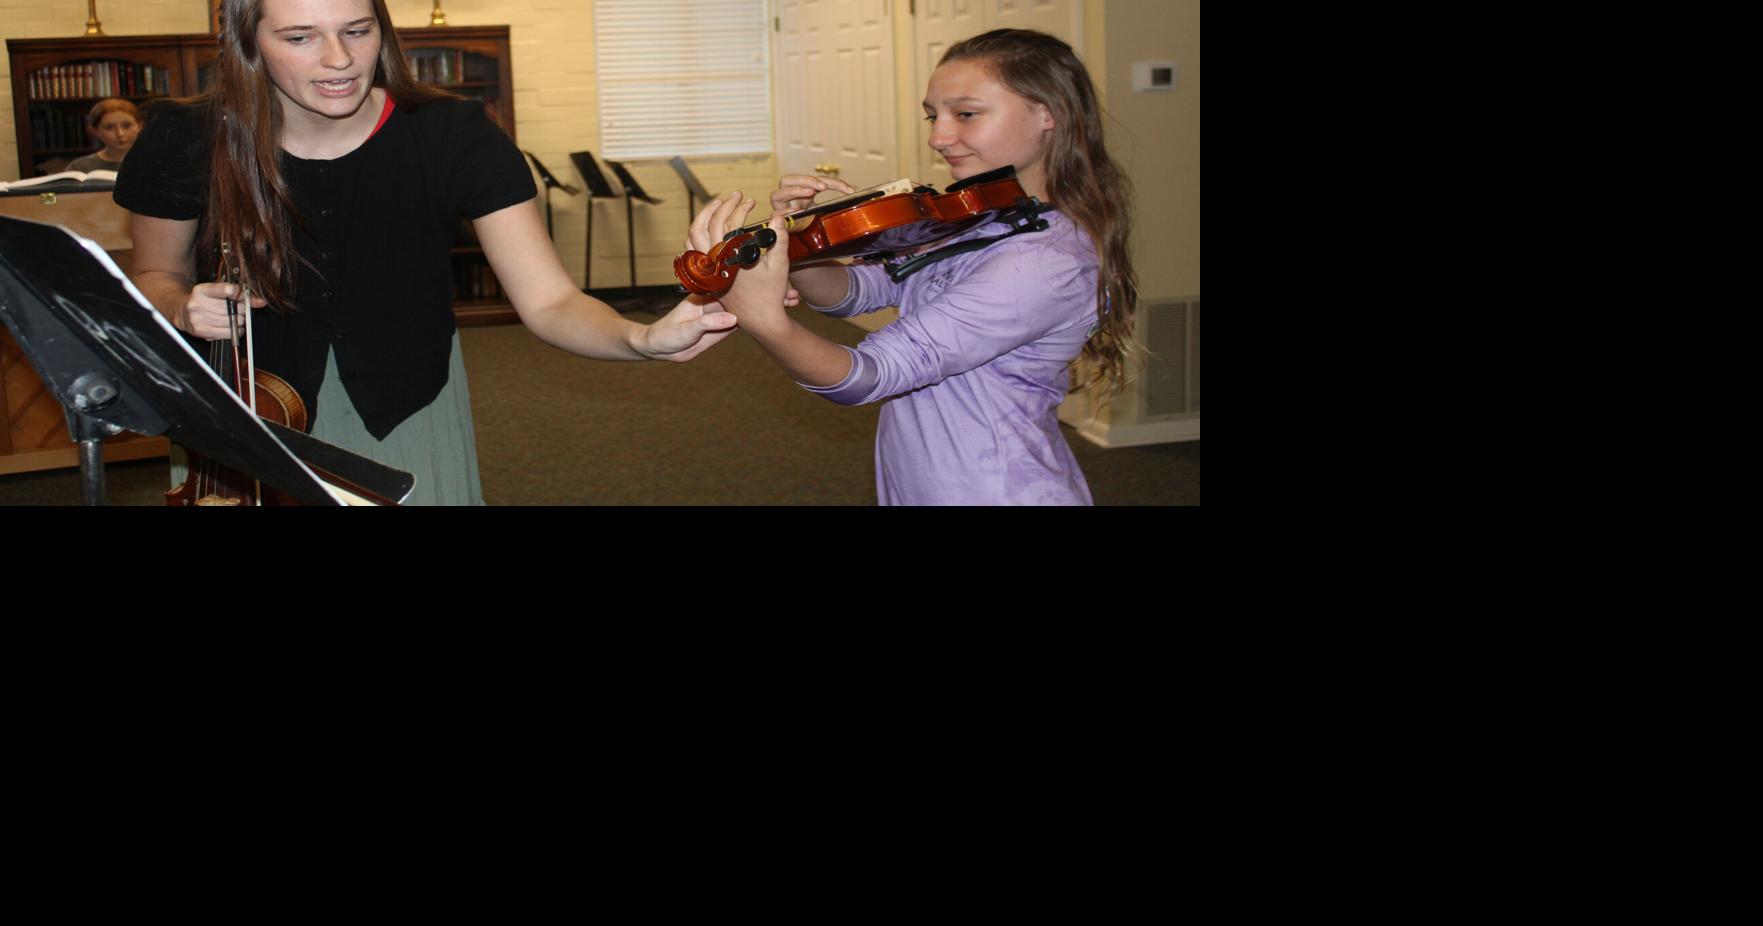 Project String Power offers lessons for string instruments | News ...